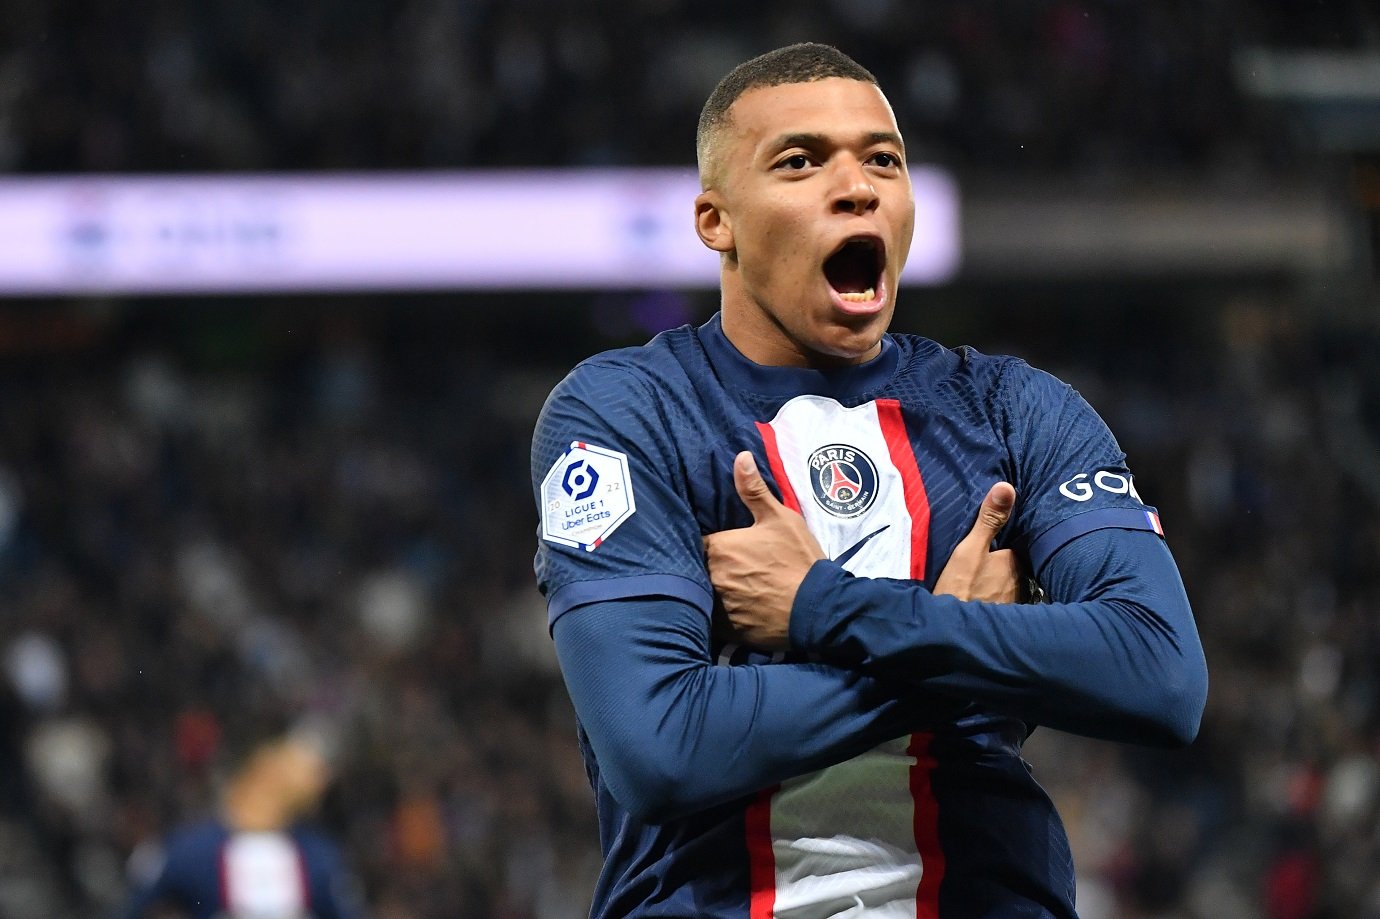 PARIS, FRANCE - MAY 13:  Kylian Mbappé celebrate of Paris Saint-Germain in action during the French Ligue 1 soccer match between Paris Saint-Germain (PSG) and AC Ajaccio at Parc des Princes Stadium on May 13, 2023 in Paris, France. (Photo by Christian Liewig - Corbis/Corbis via Getty Images)